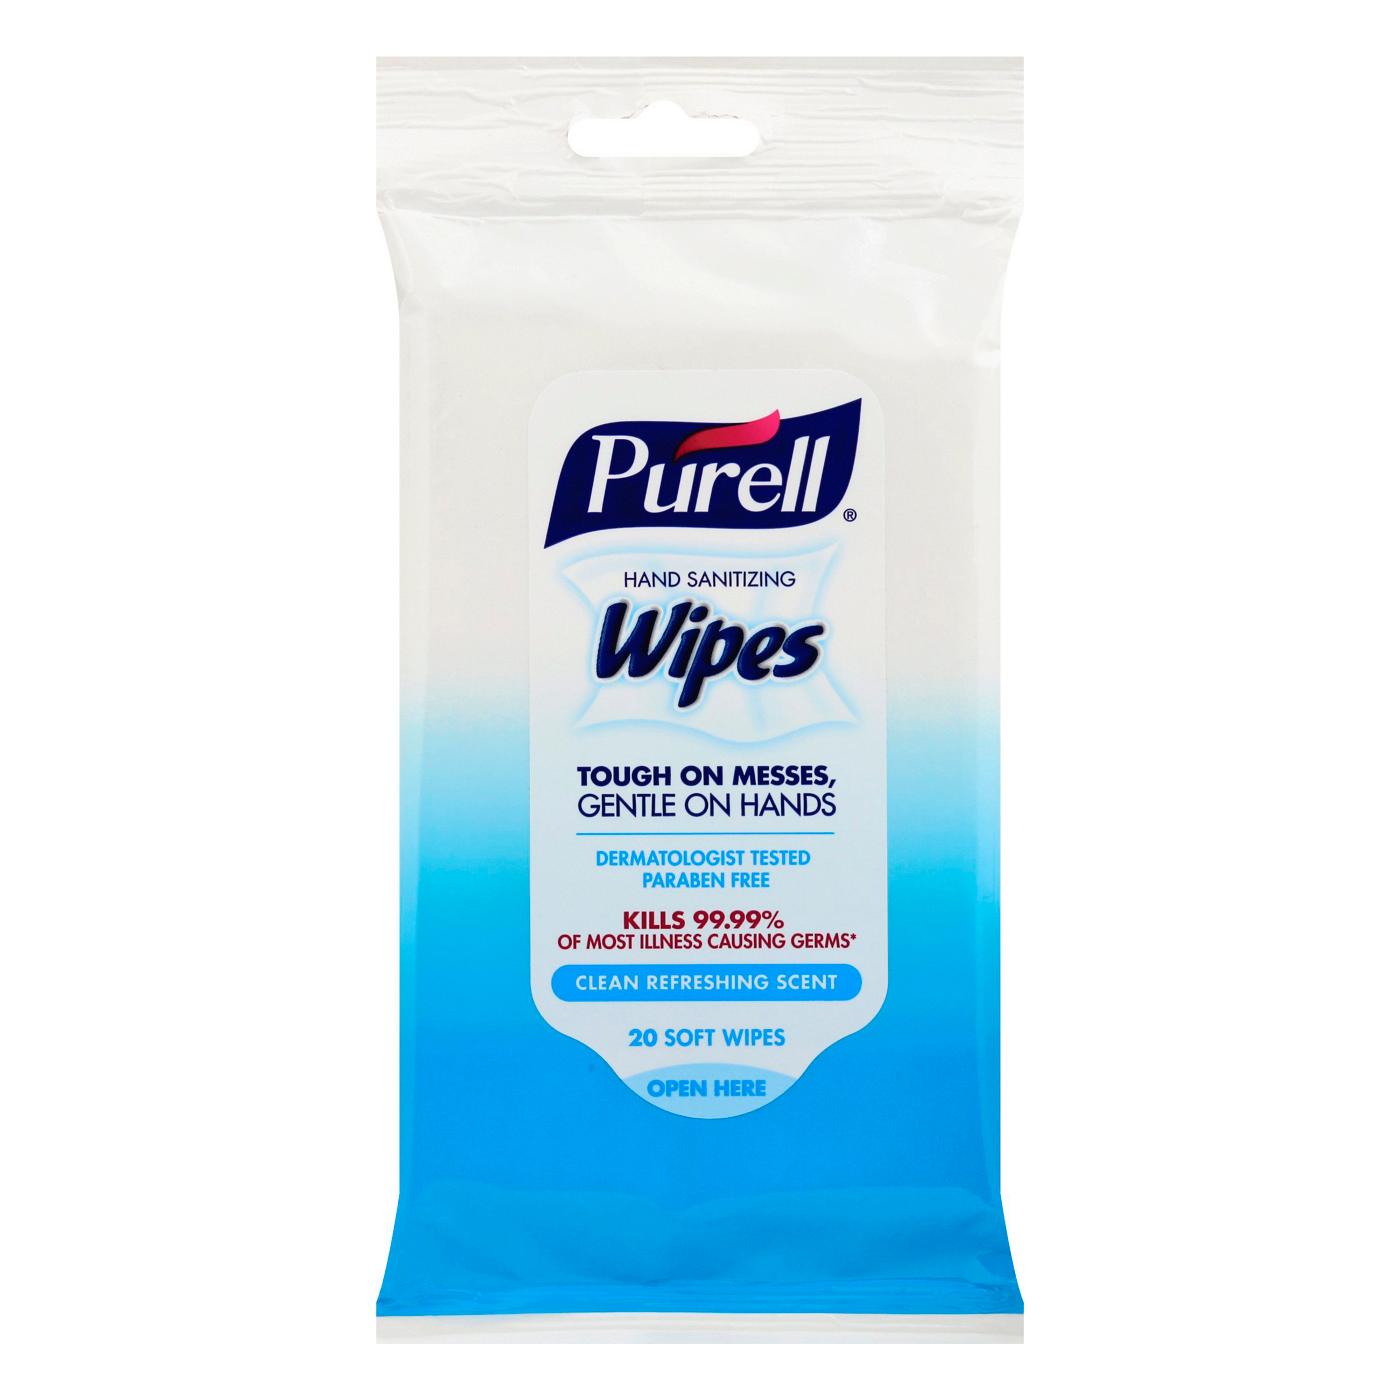 Purell Hand Sanitize Wipes; image 1 of 3